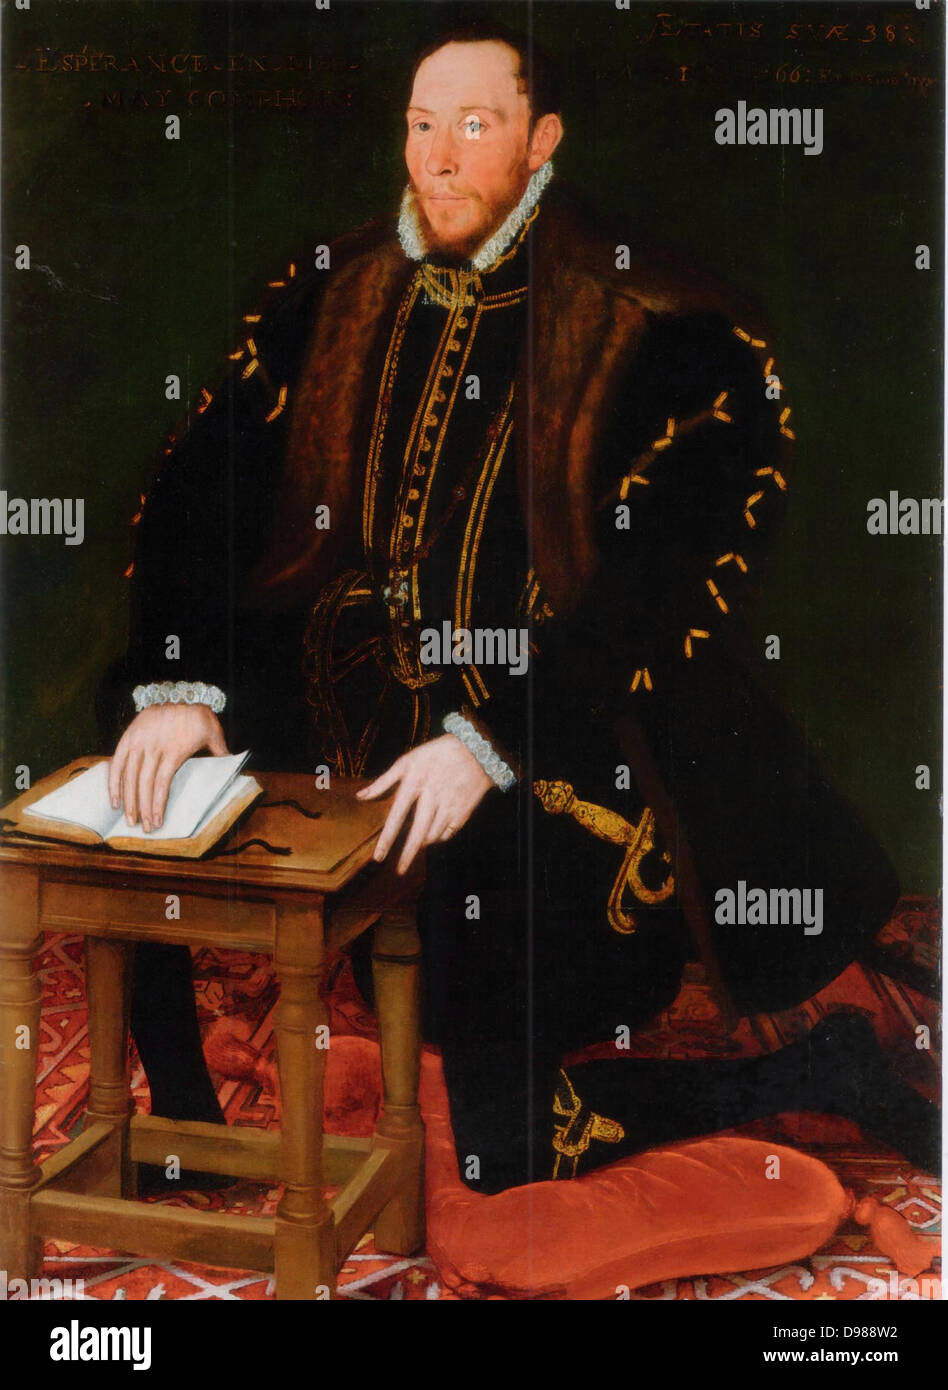 Thomas Percy, 7th Earl of Northumberland (1528-1572) English nobleman who followed the Roman Catholic faith. In 1569 led the Rising of the North in support of Mary Queen of Scots. When it failed he fled to Scotland but was handed over to the English, found guilty of treason and beheaded. Later beatified by the Roman Catholic church. Stock Photo